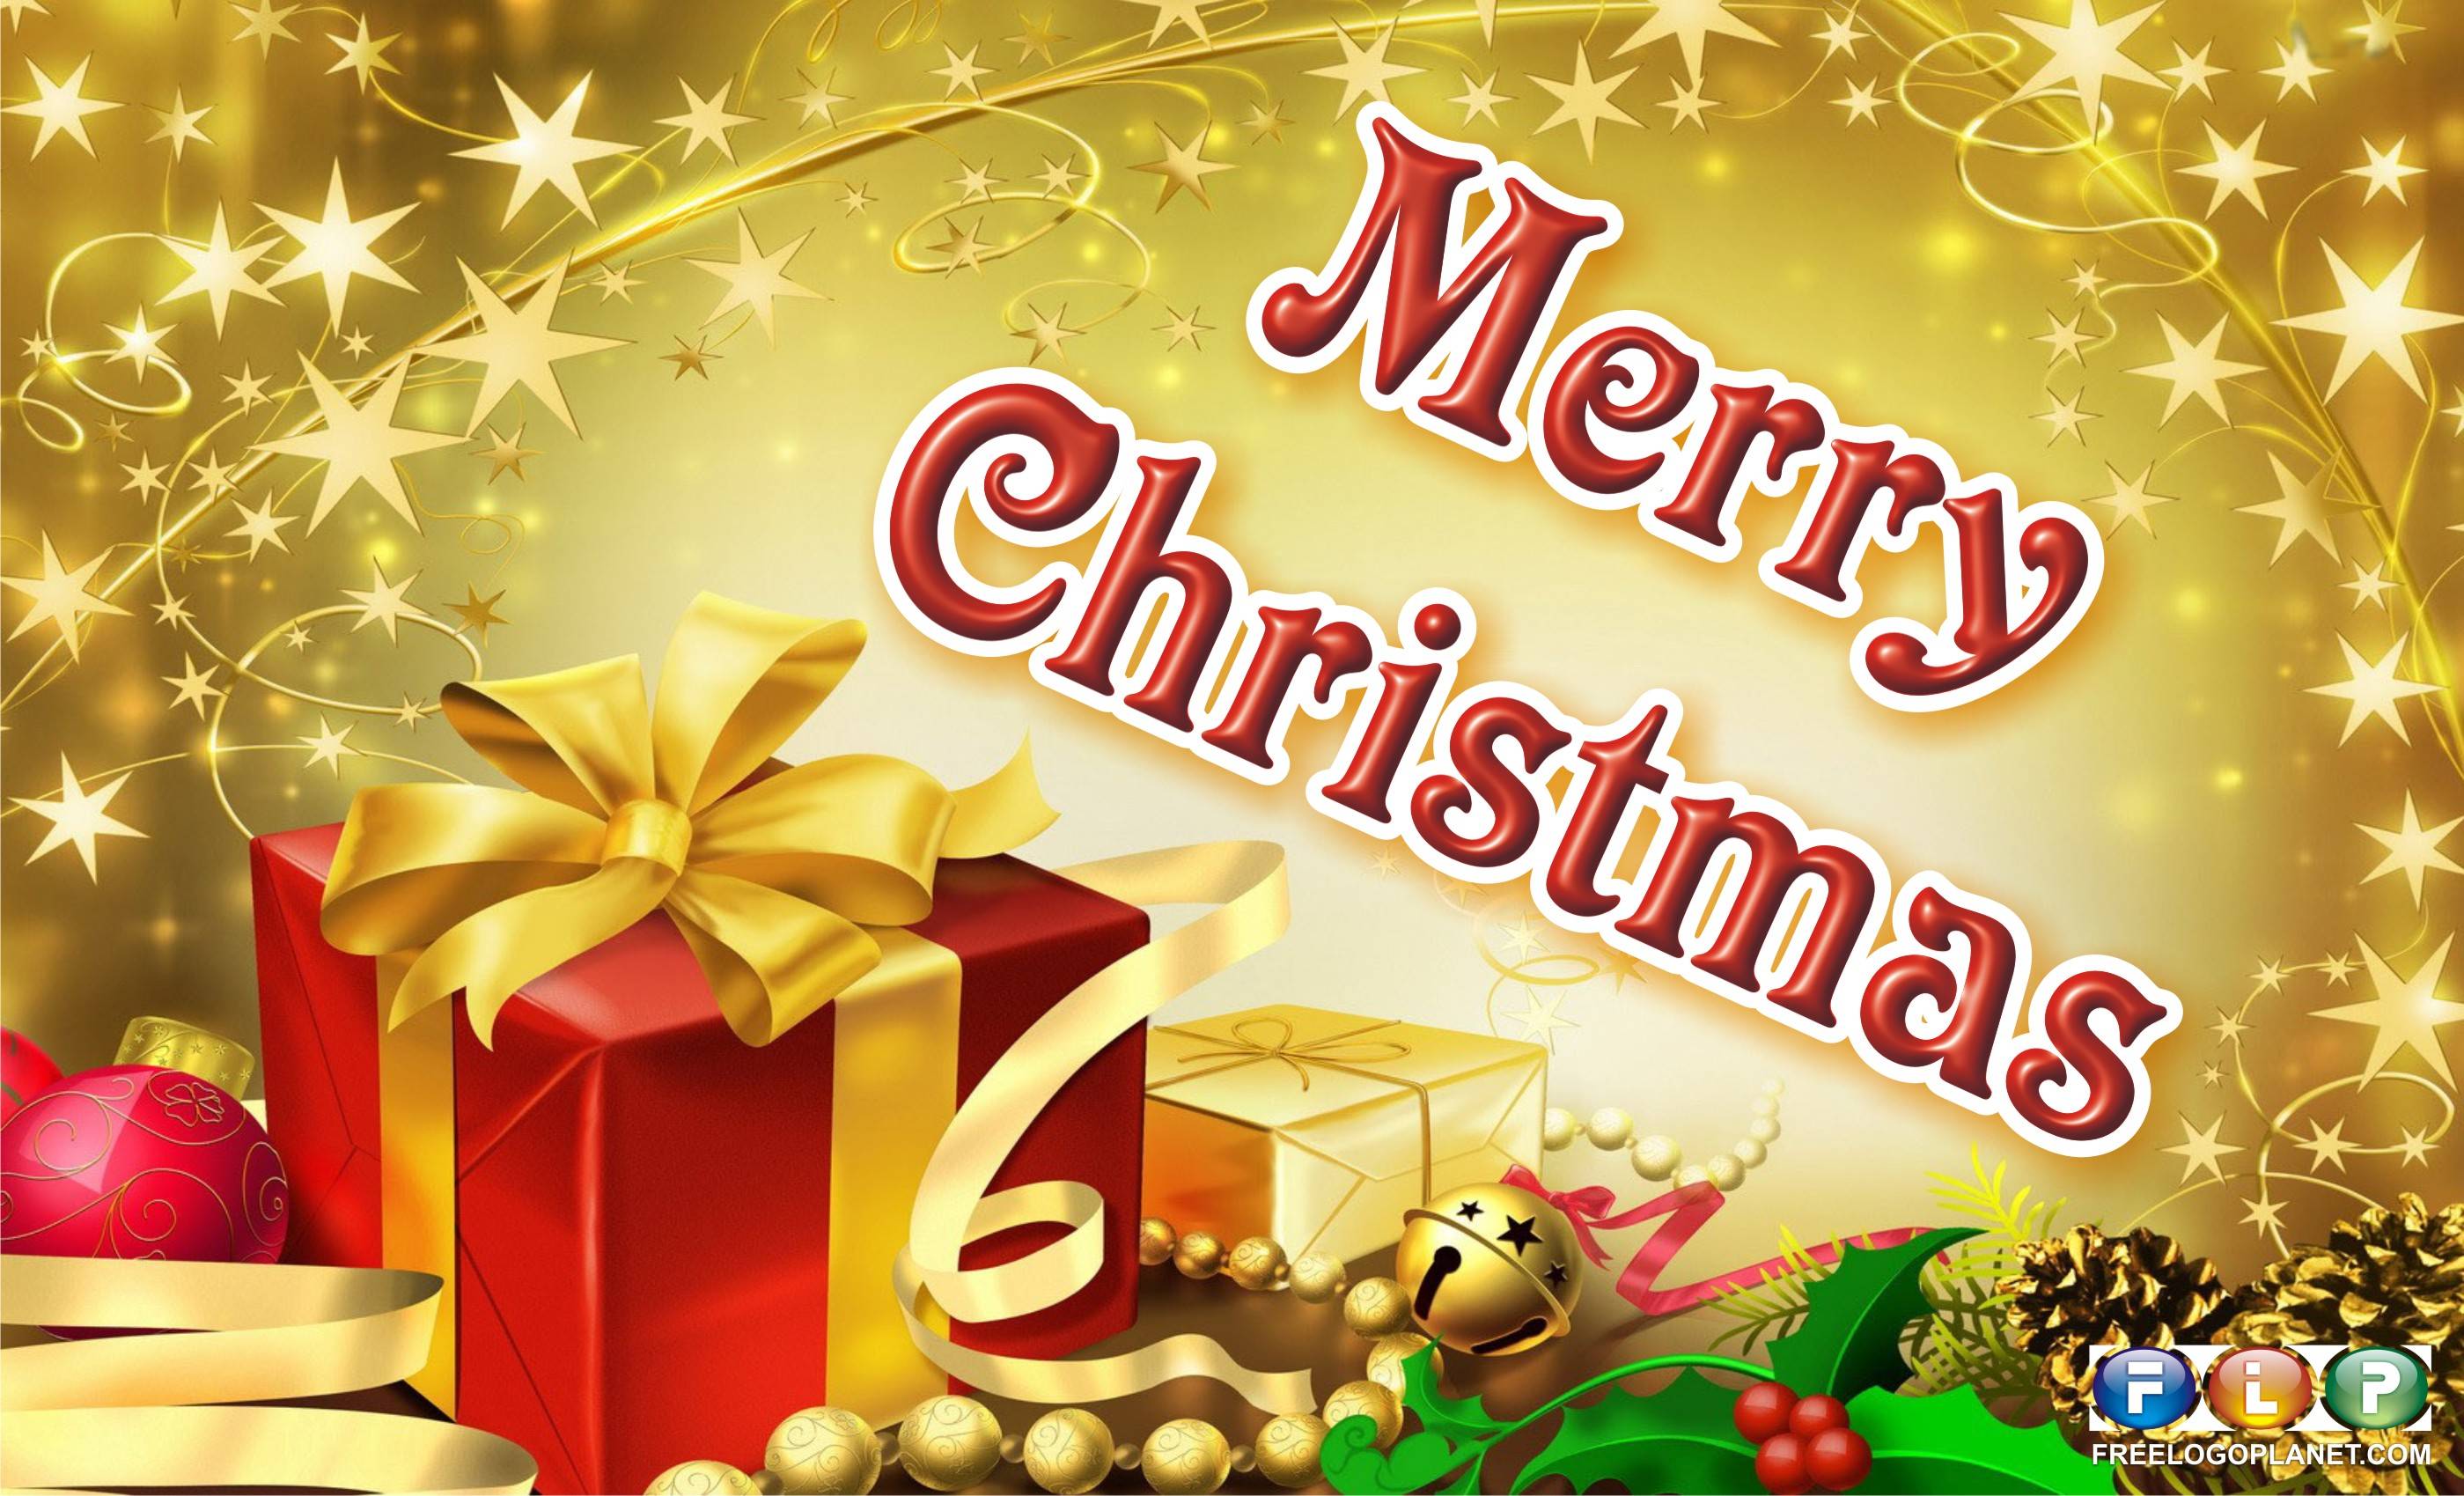 Merry Christmas 2014 Best Wishes Quotes And Wallpaper